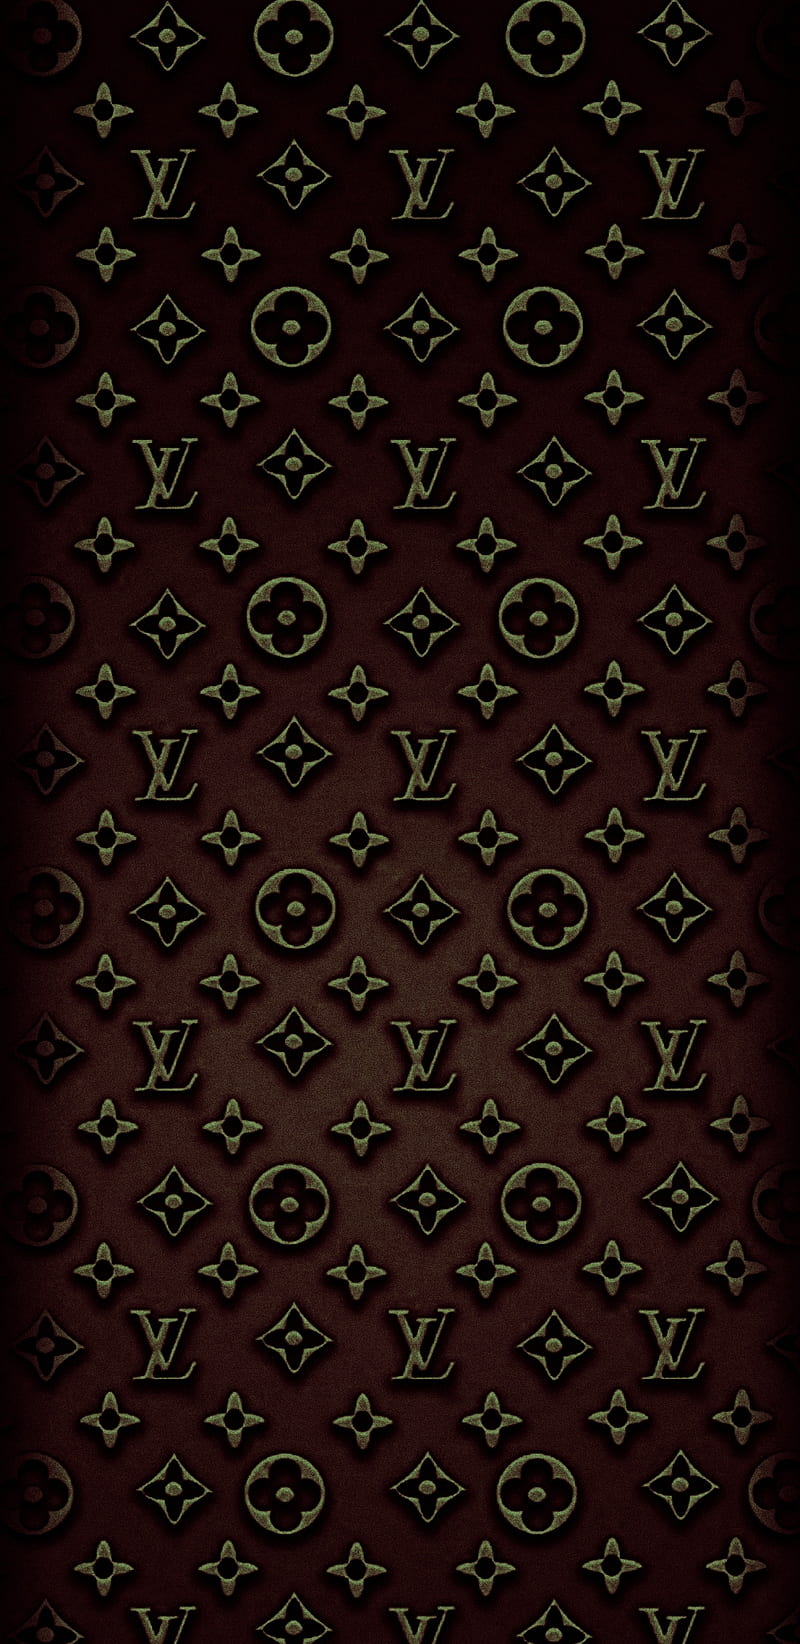 Louis Vuitton Brown Wallpaper Editorial Photography - Illustration of  texture, brand: 235943817